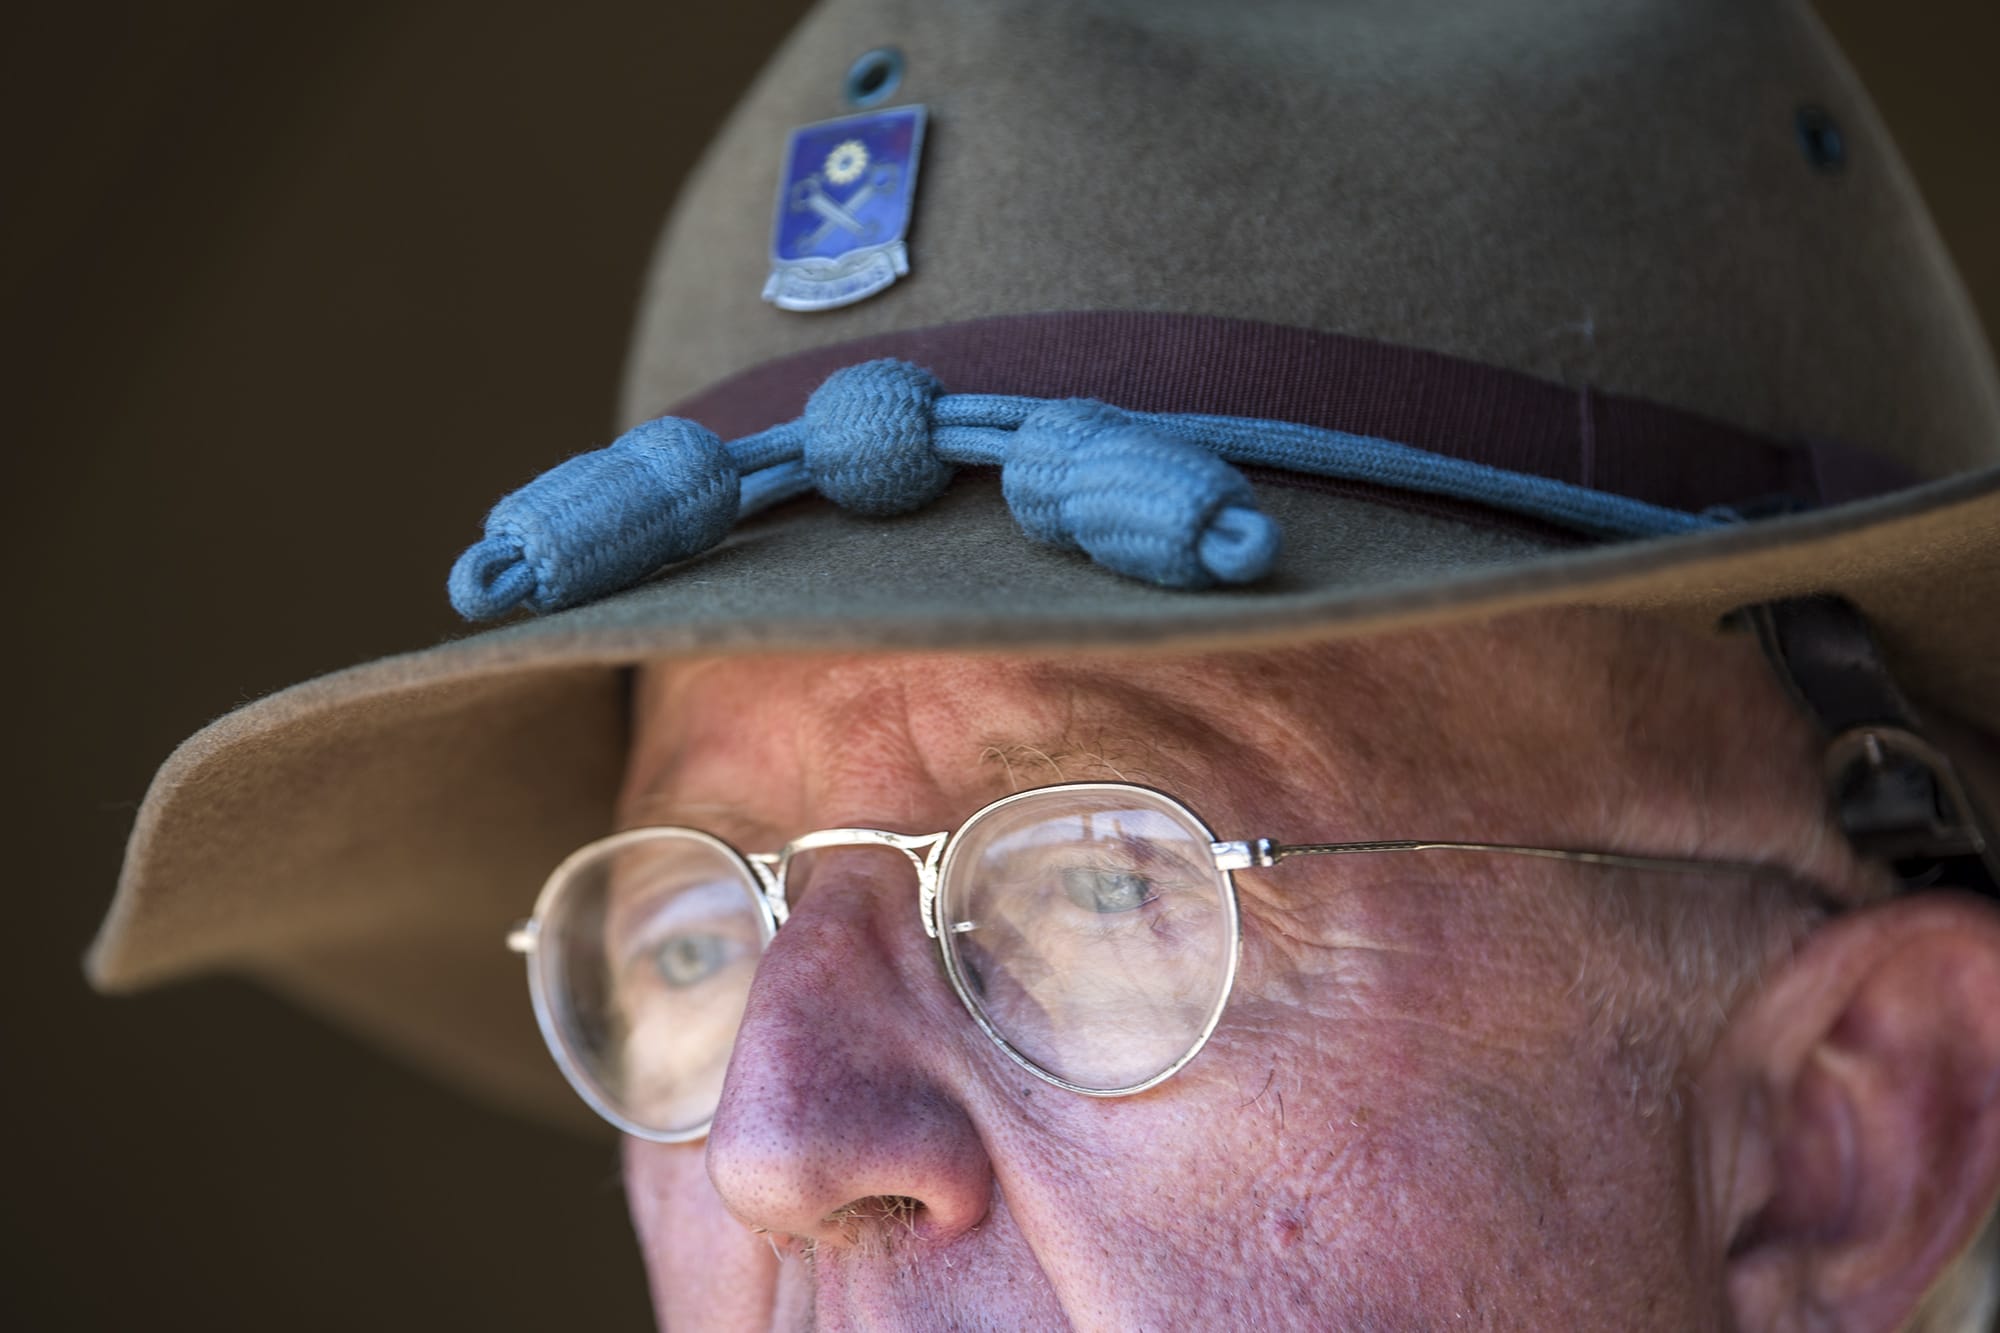 Corky Porter of Salem, Ore., wears a pair of 1940s eyeglasses, with new lenses, during the World War II living history encampment at Fort Vancouver National Historic Site on Friday, July 20, 2018. "I like the '40s glasses better," Porter said.